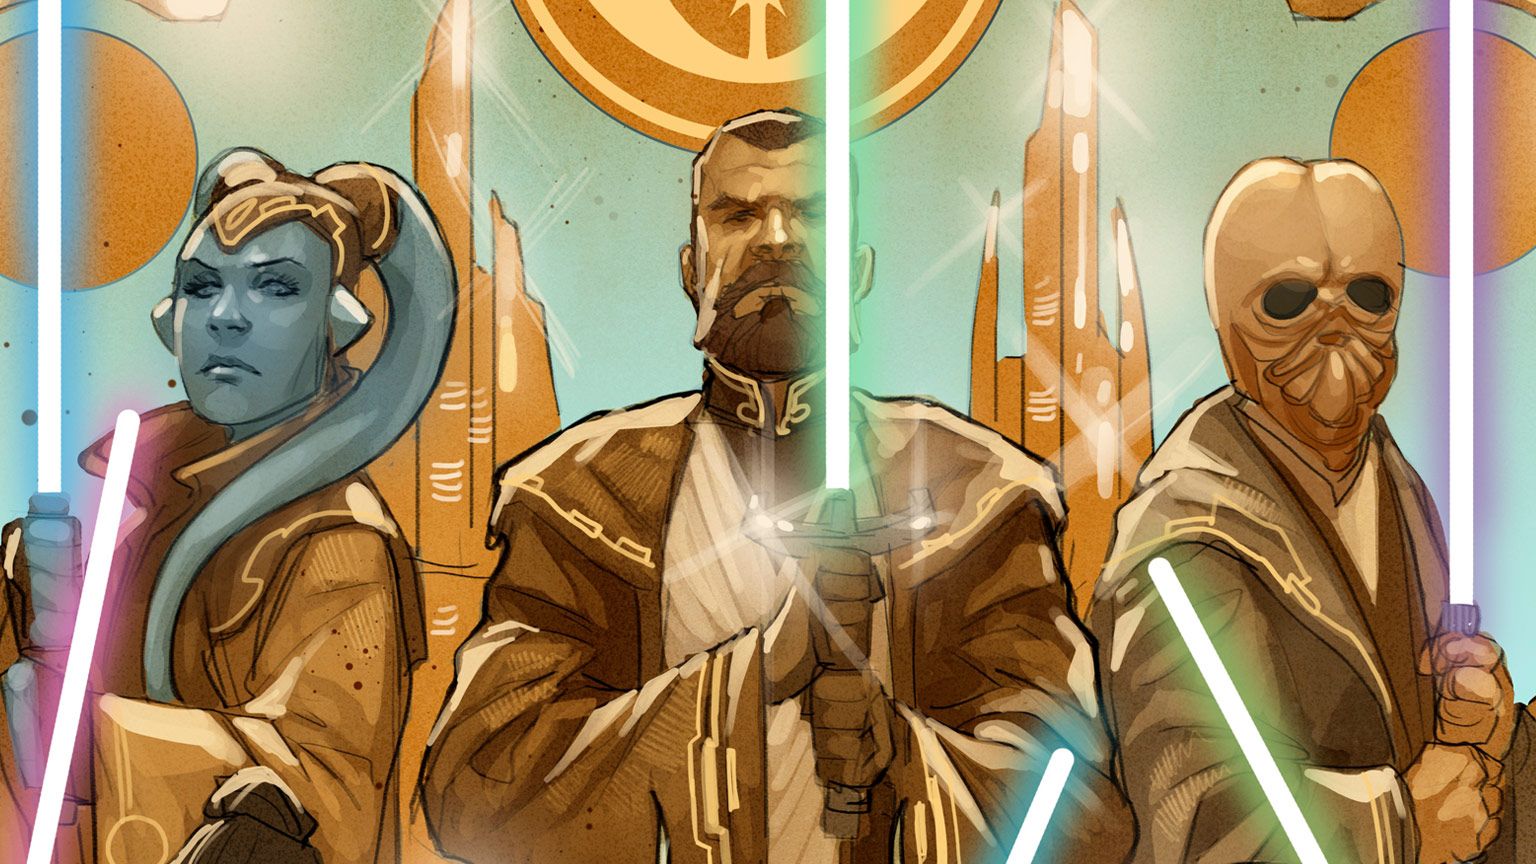 Star Wars Writer Teases More High Republic Stories On The Way